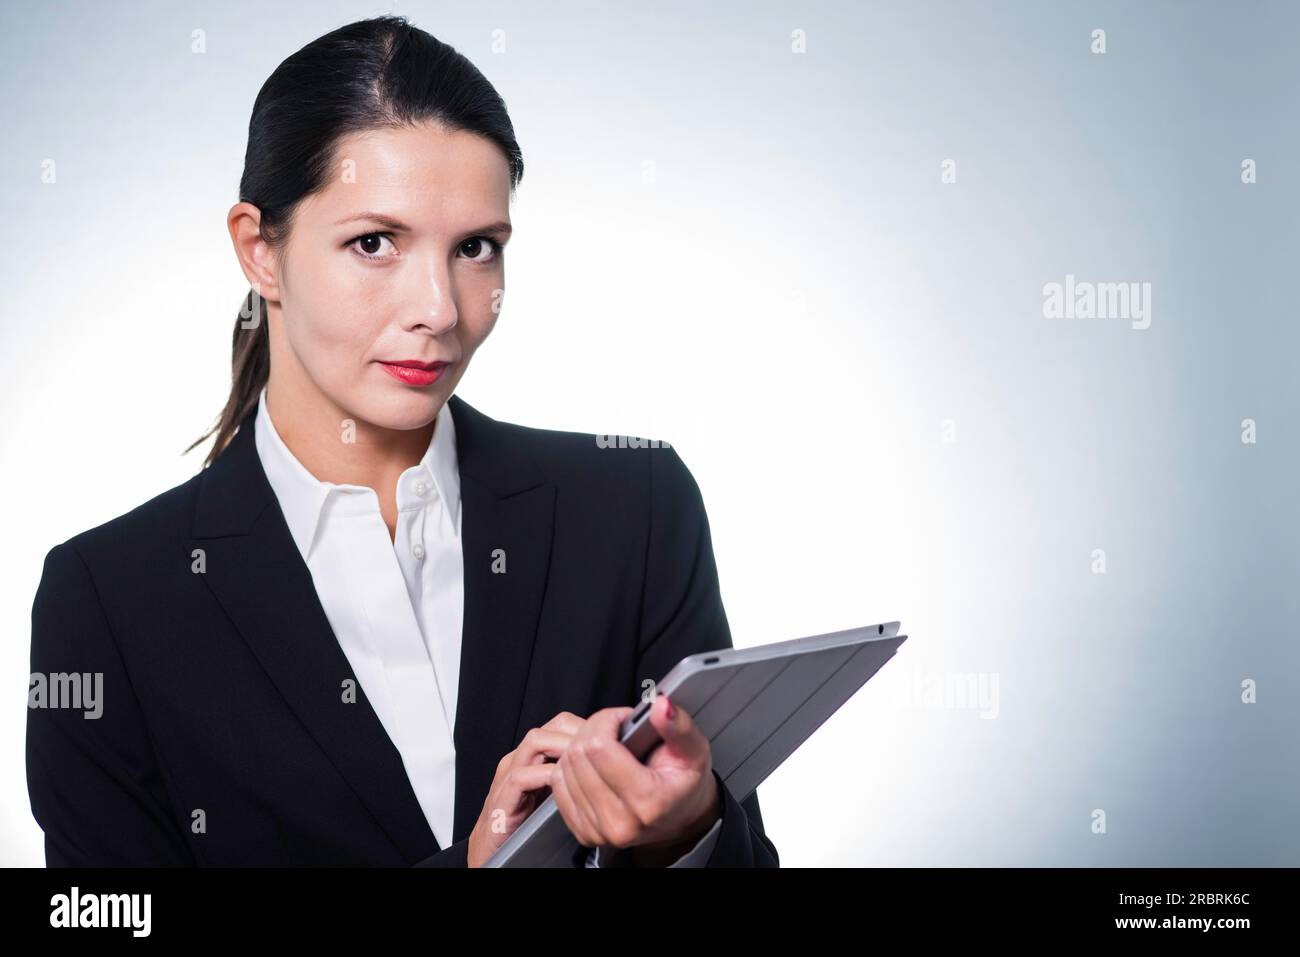 Confident business manageress working on a tablet computer as she stands looking at the camera with a serious thoughtful expression, studio portrait Stock Photo